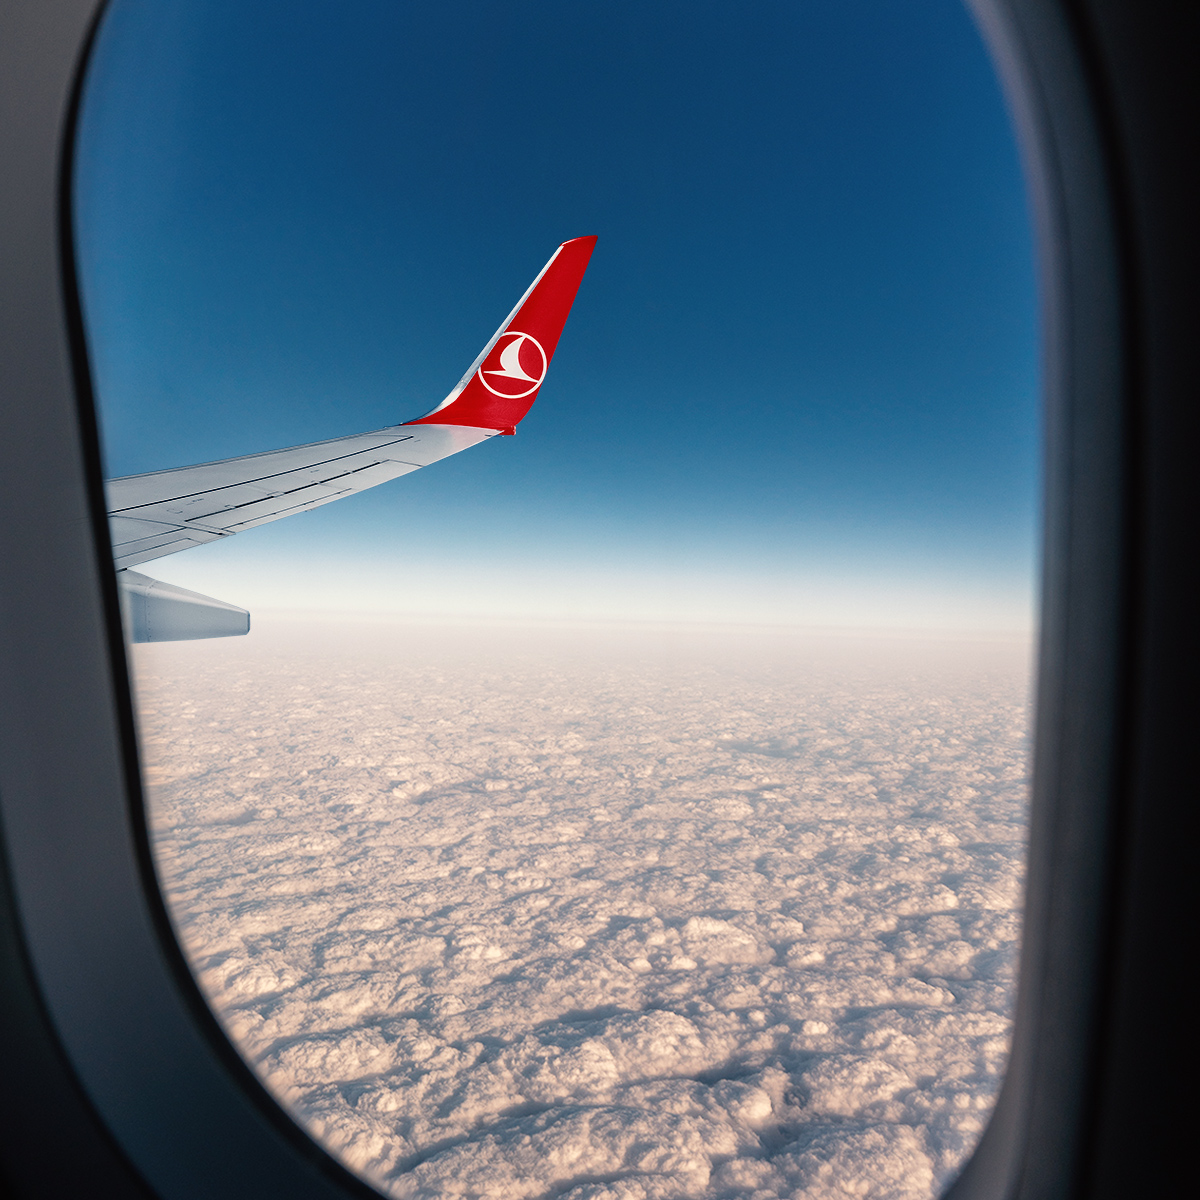 After a hiatus of two years and eight months, Turkish Airlines plans to resume its flights to Afghanistan on May 21. There will be four flights a week between Kabul International Airport (KBL) and Istanbul Airport (IST). The move follows other carriers Fly Dubai and Air